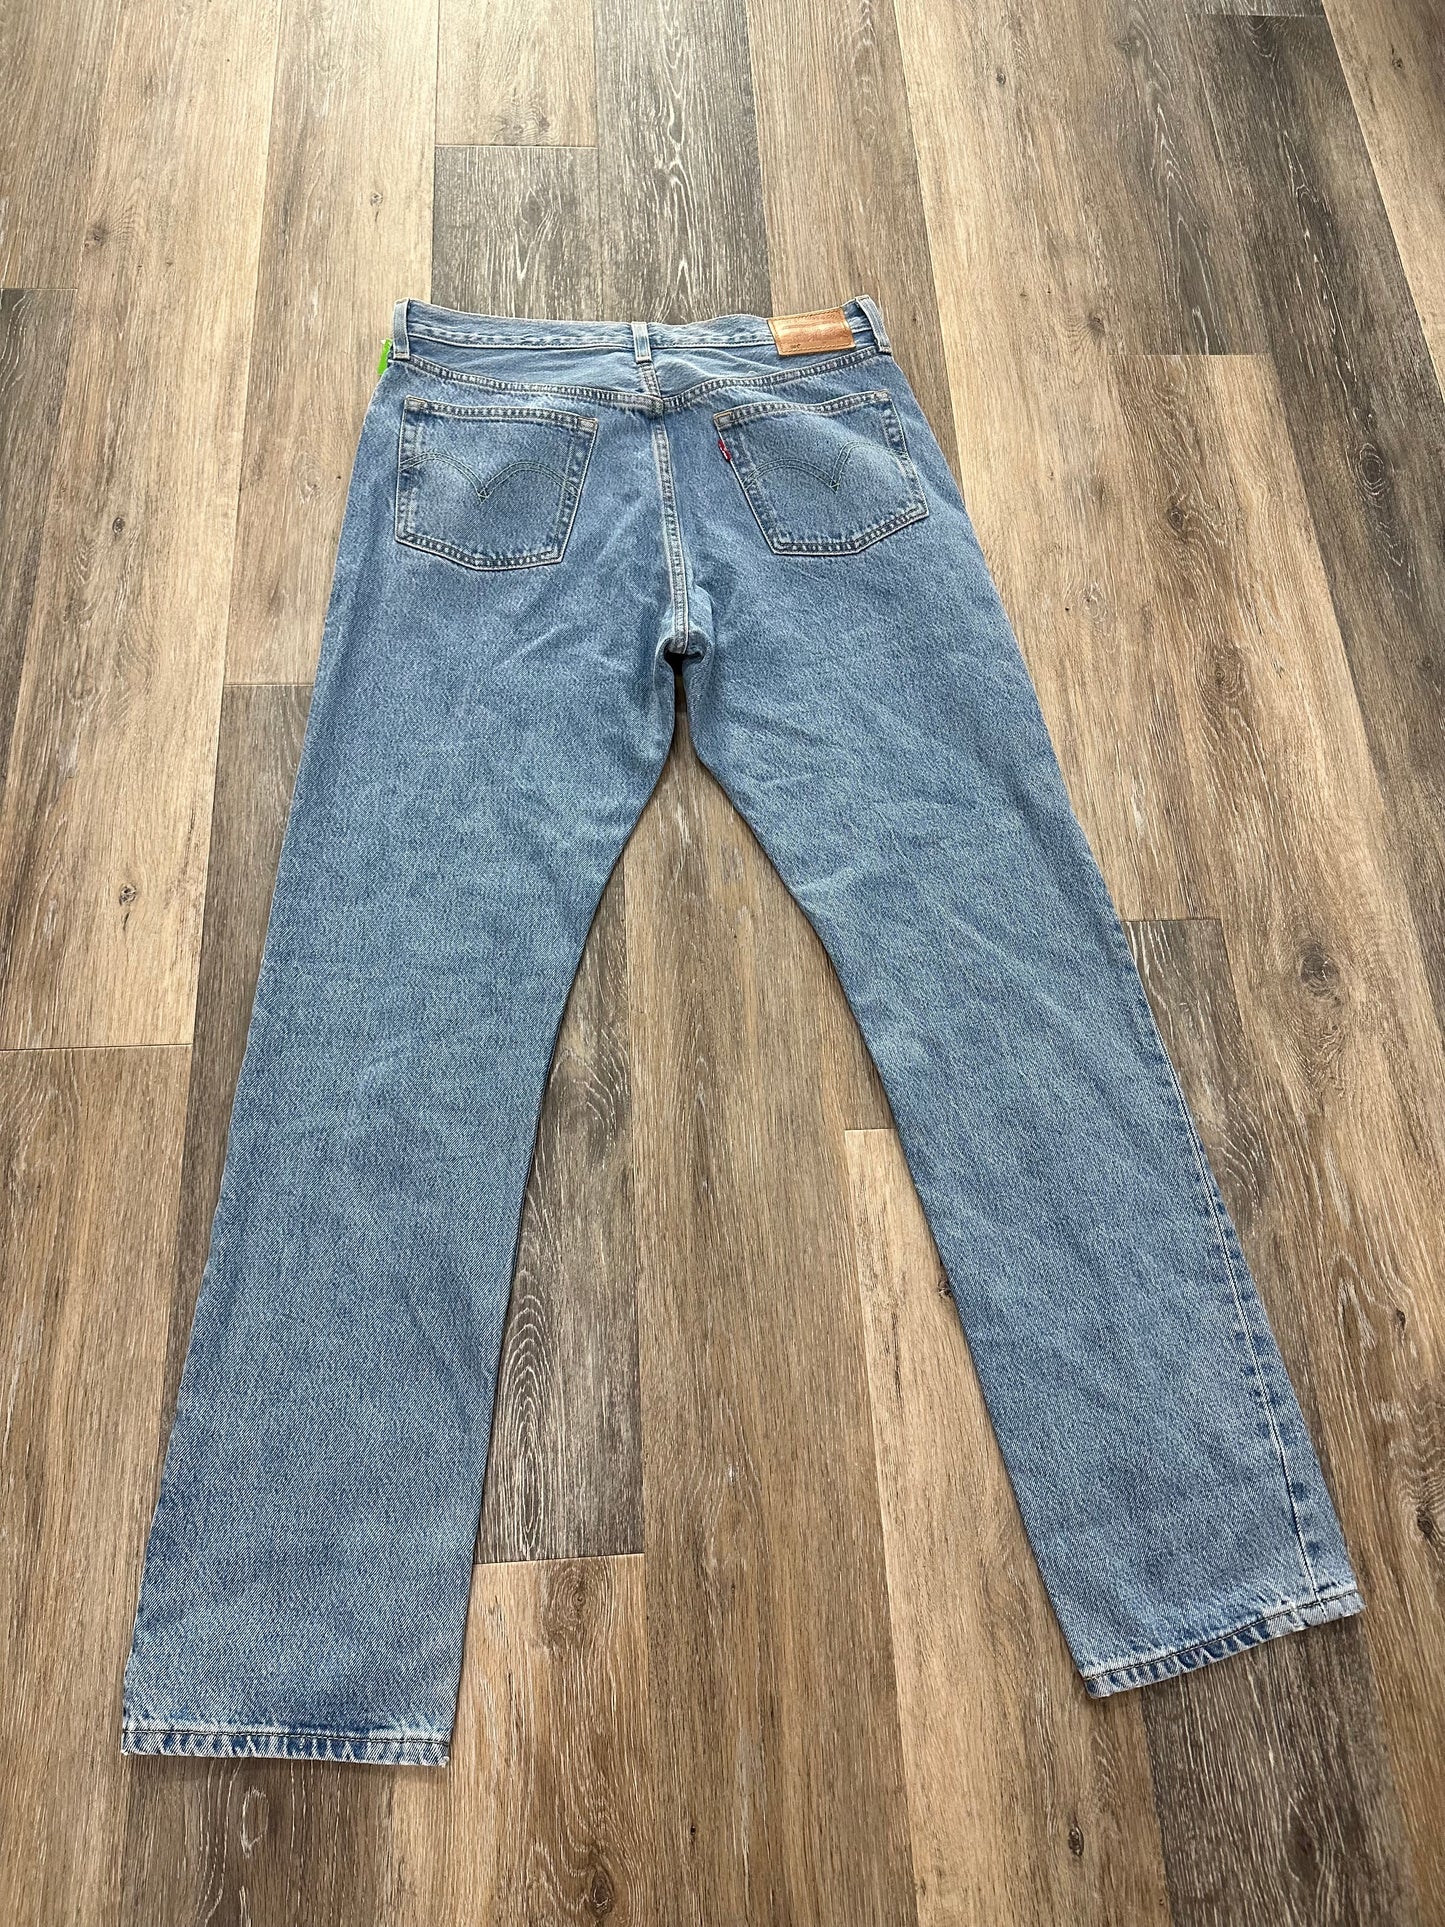 Jeans Boot Cut By Levis  Size: 14